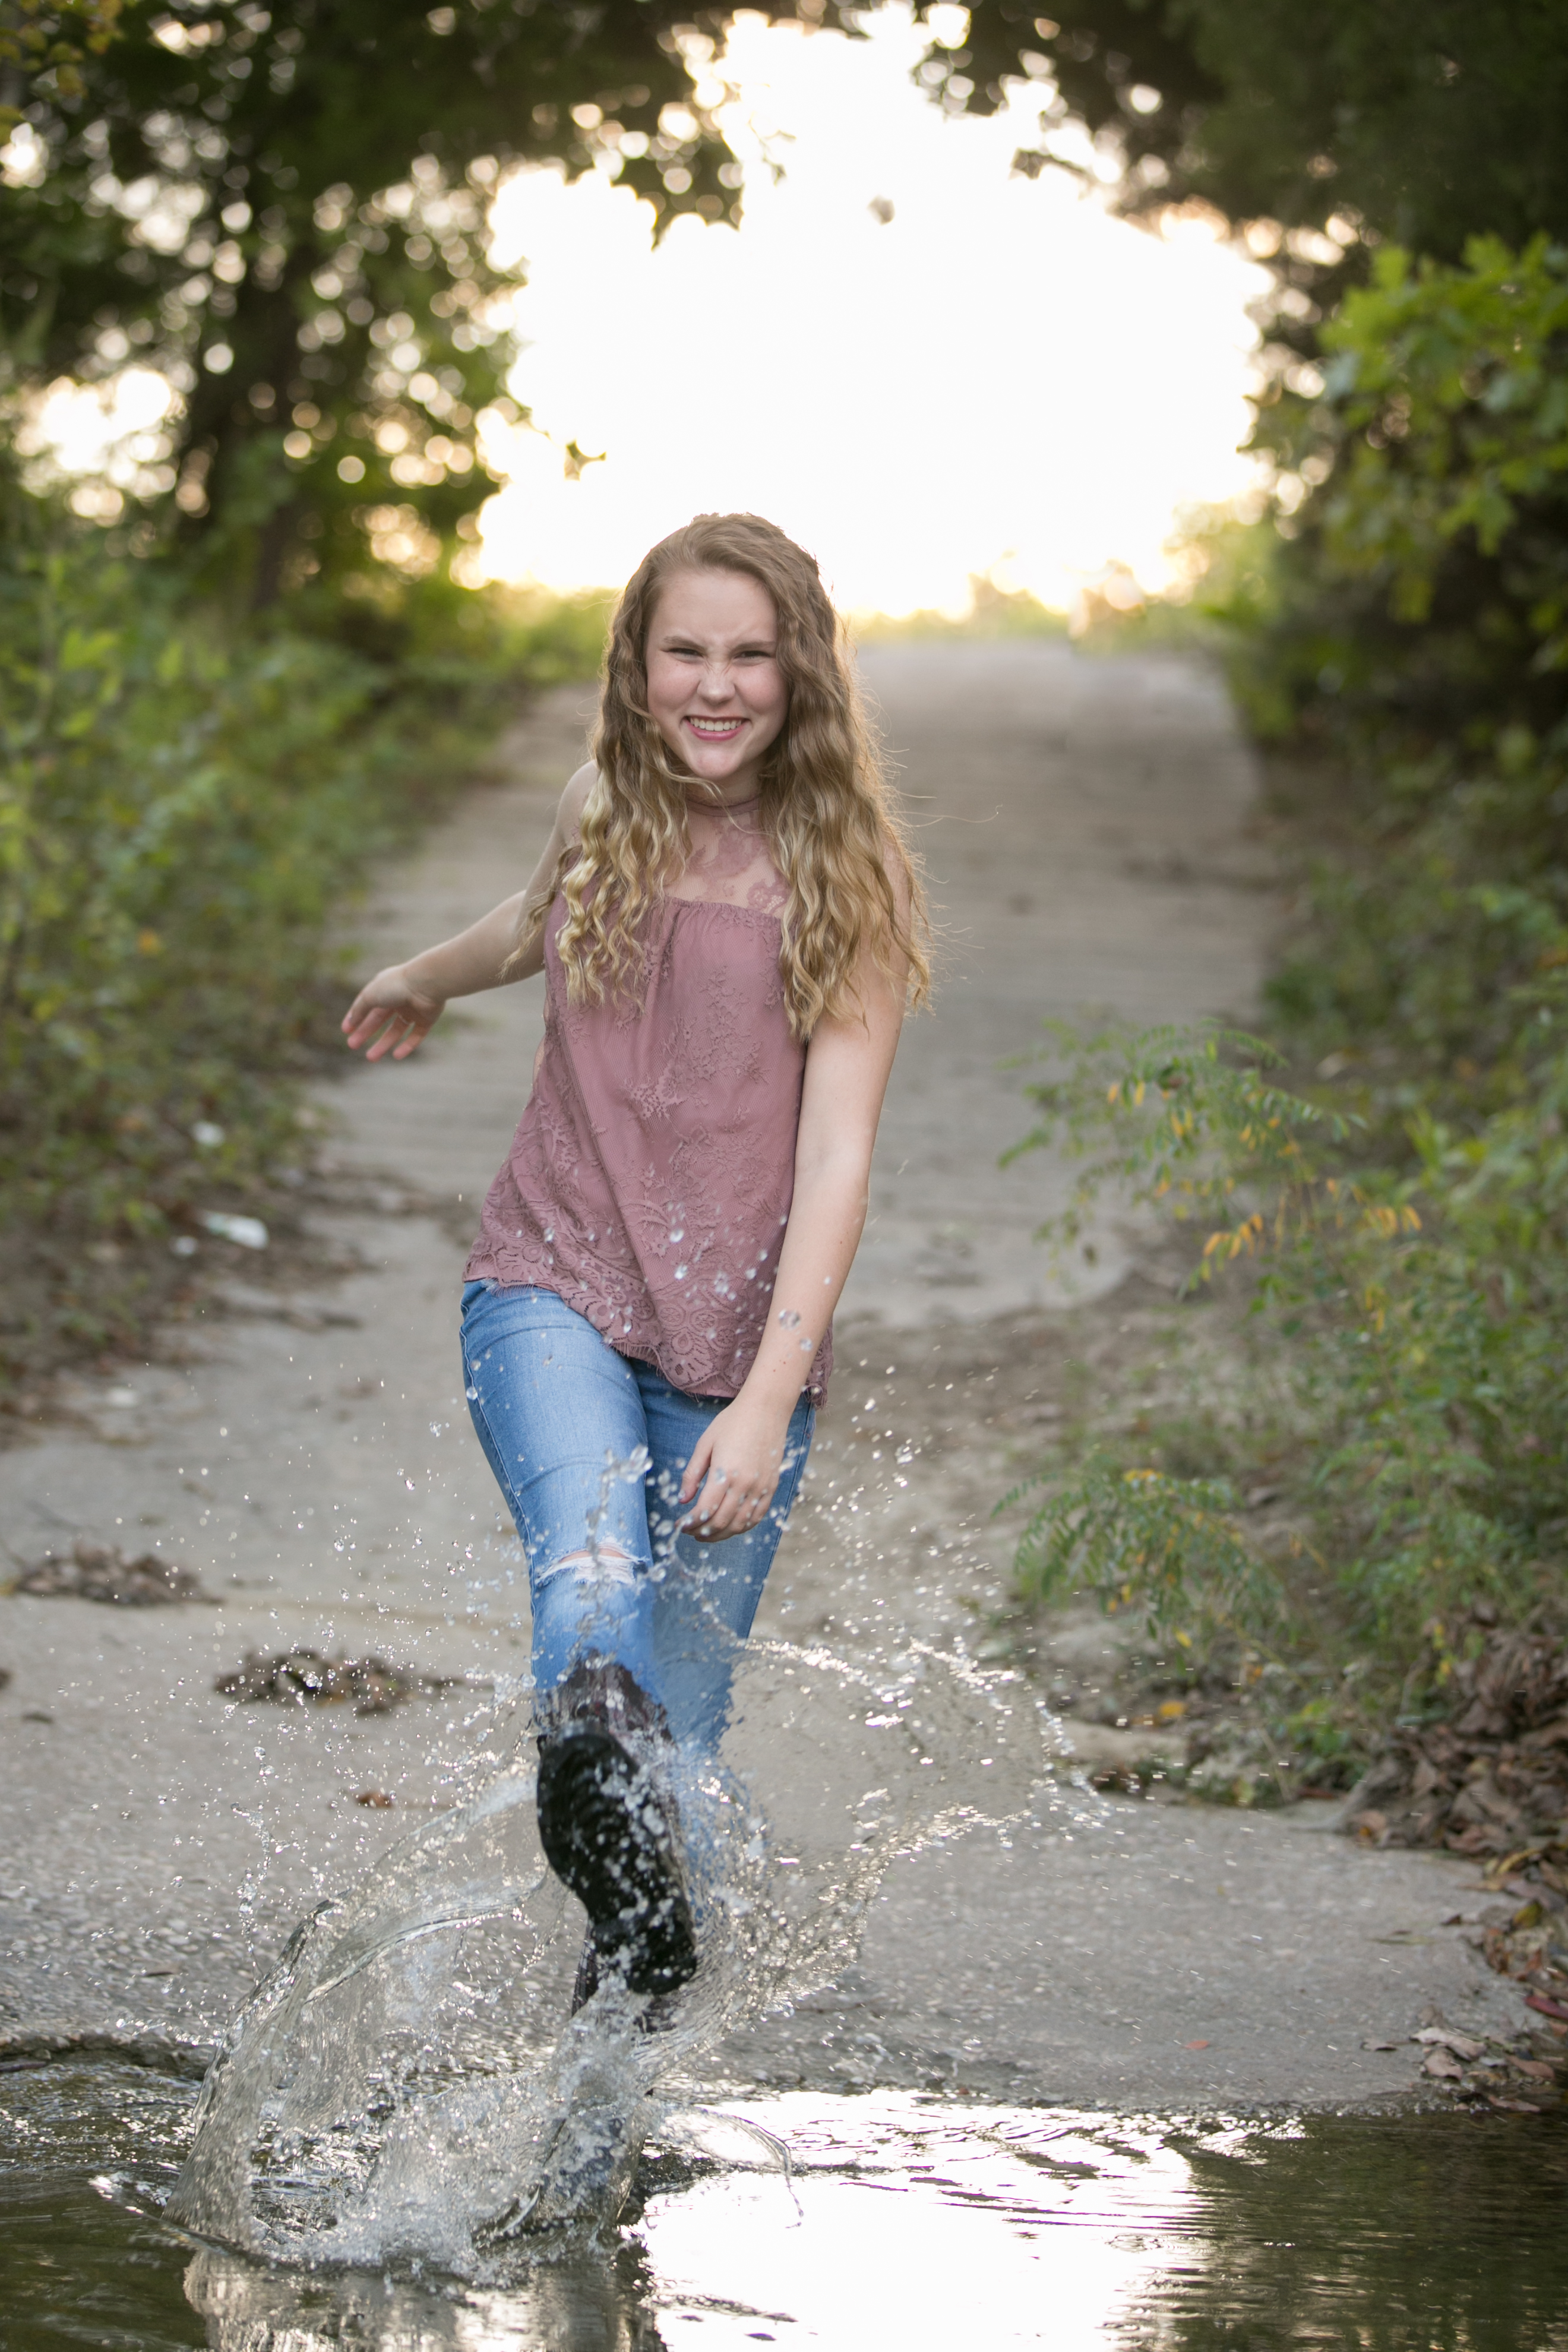 Top 10 Senior Portrait Ideas by 12 by Golightly Images located in Dallas, TX